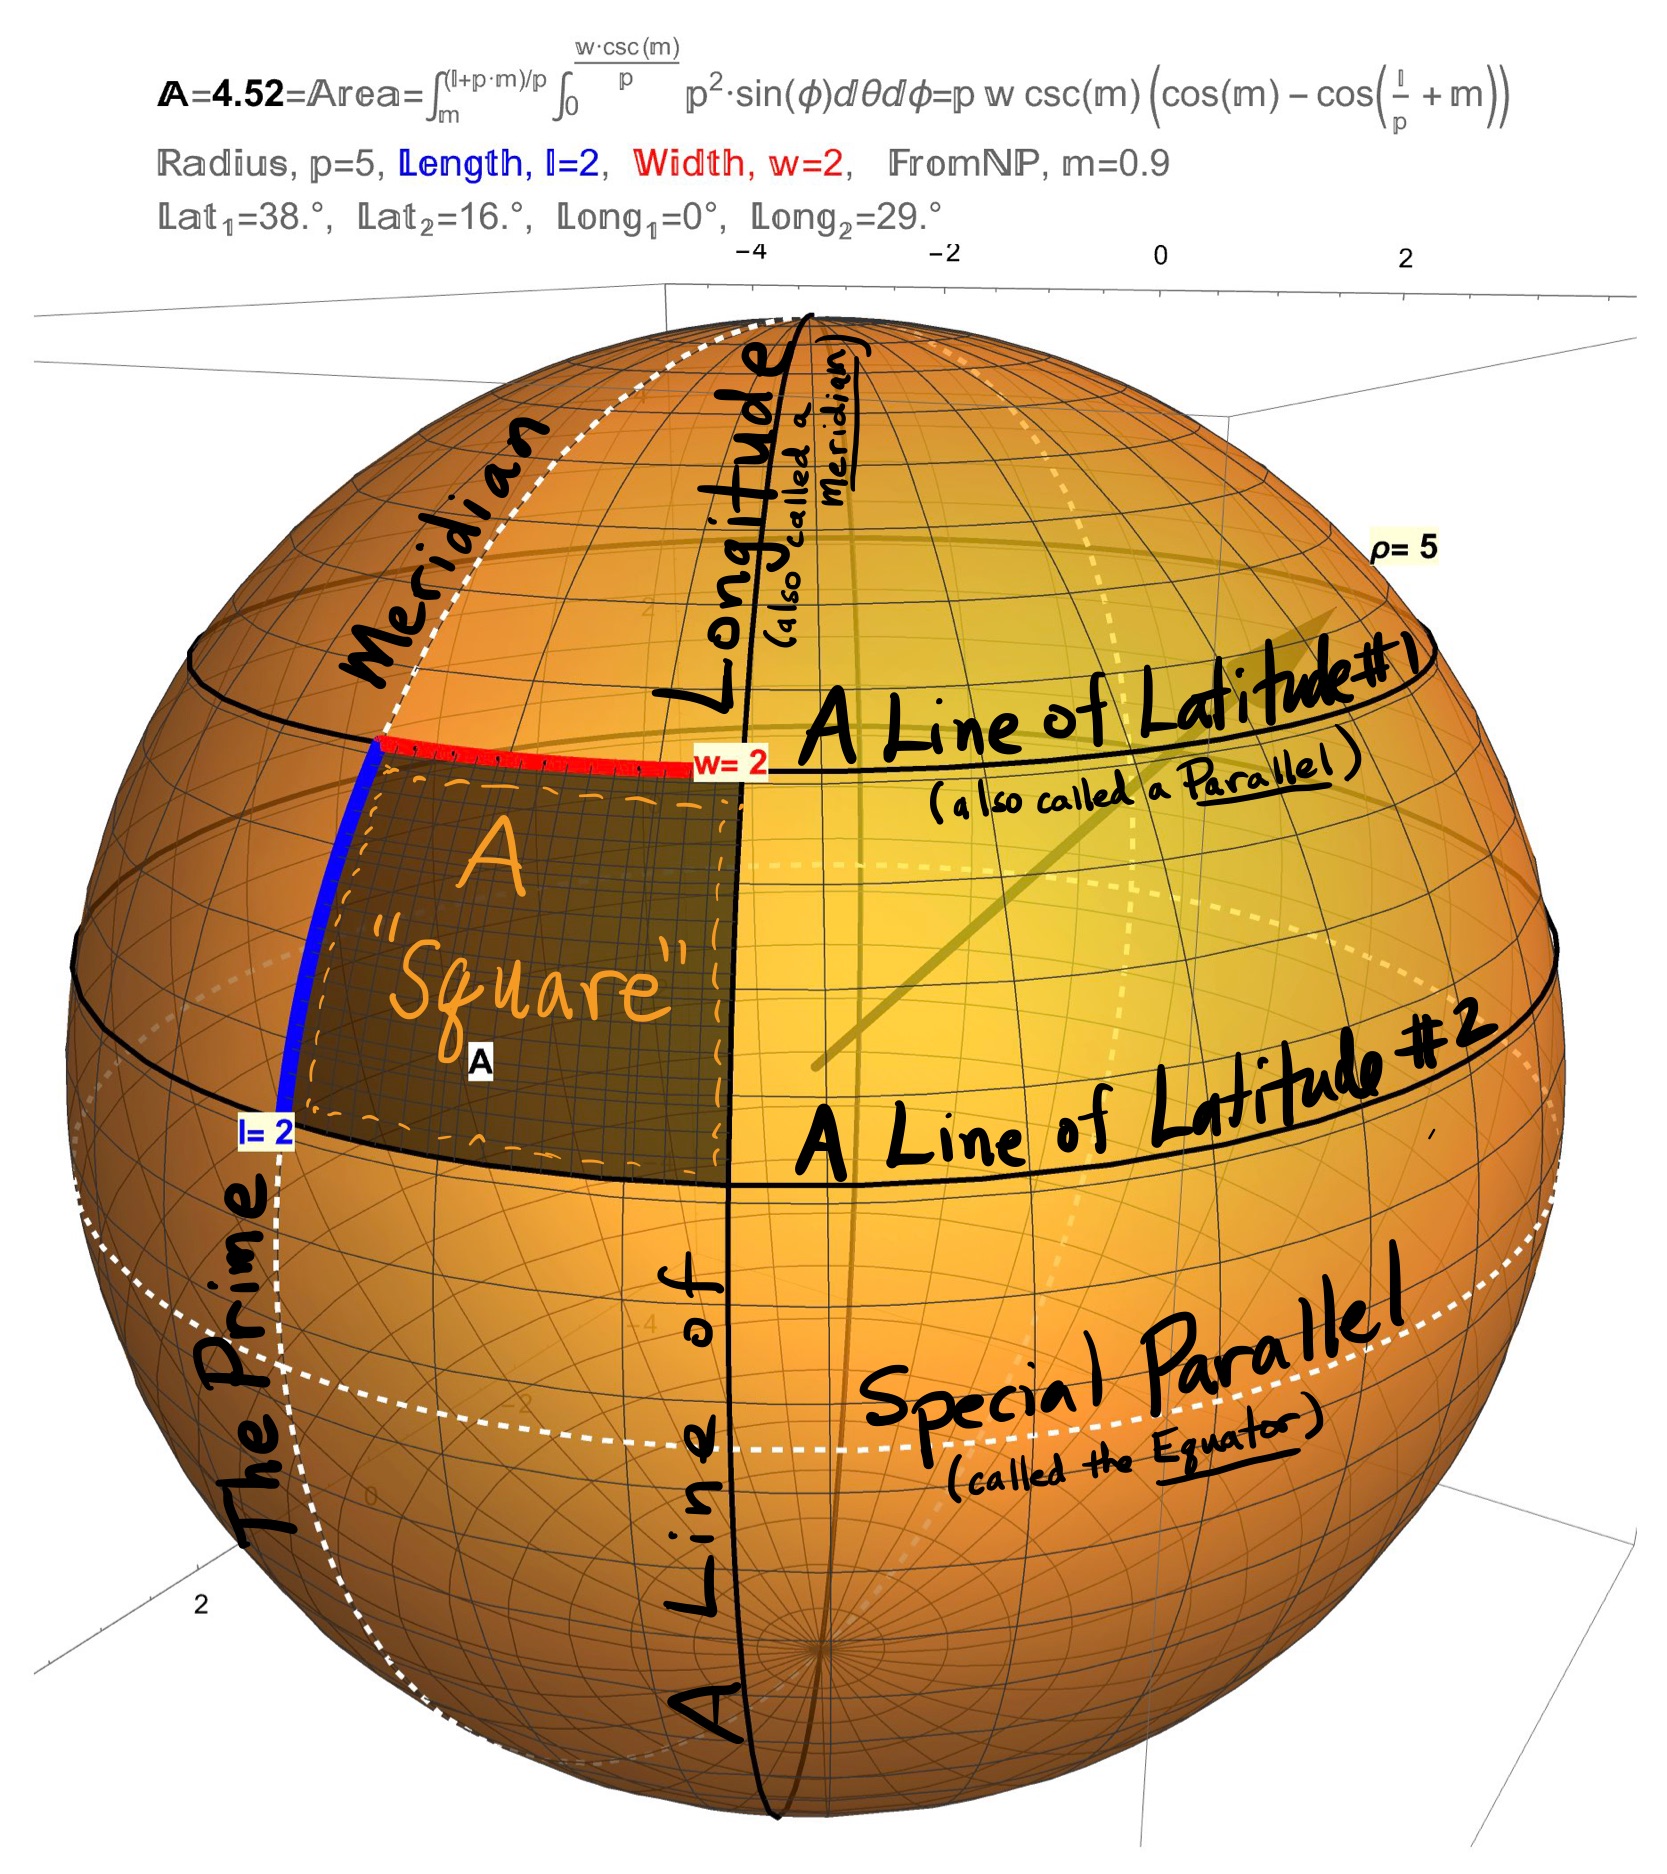 Special Curves and Regions On a Sphere: The Meridians are the circles of constant Longitude (i.e. the Lines of Longitude) while the Parallels are the circles of constant Latitude (i.e. the Lines of Latitude). Define a Square to be the region between two equally spaced Latitudes and two Longitudes.